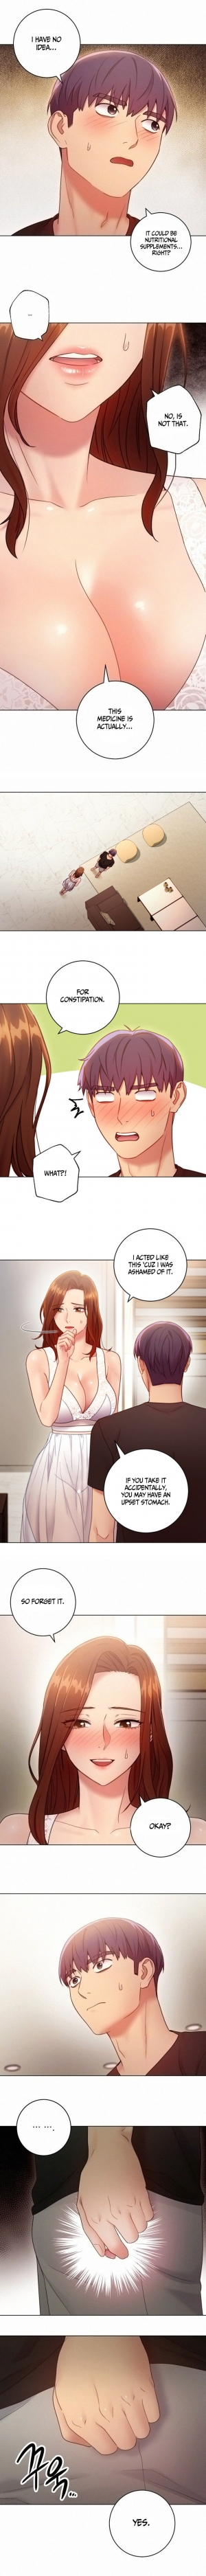  [Neck Pilllow] Stepmother Friends Ch.39/? [English] [Hentai Universe] NEW! 13/10/2020  - Page 311